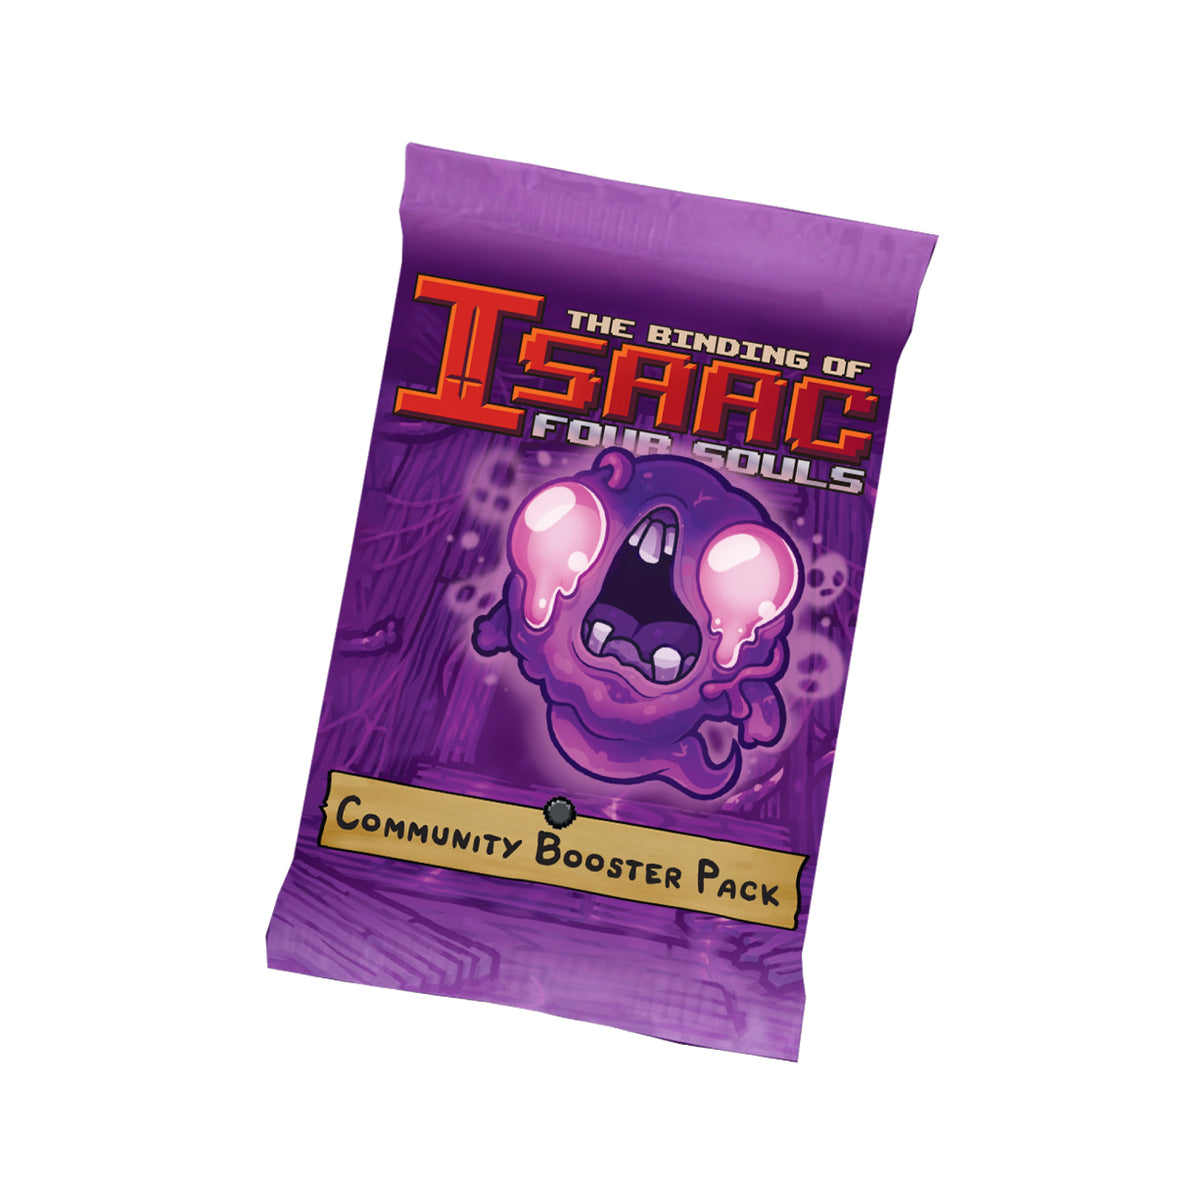 The Binding of Isaac: Four Souls Community Booster Pack